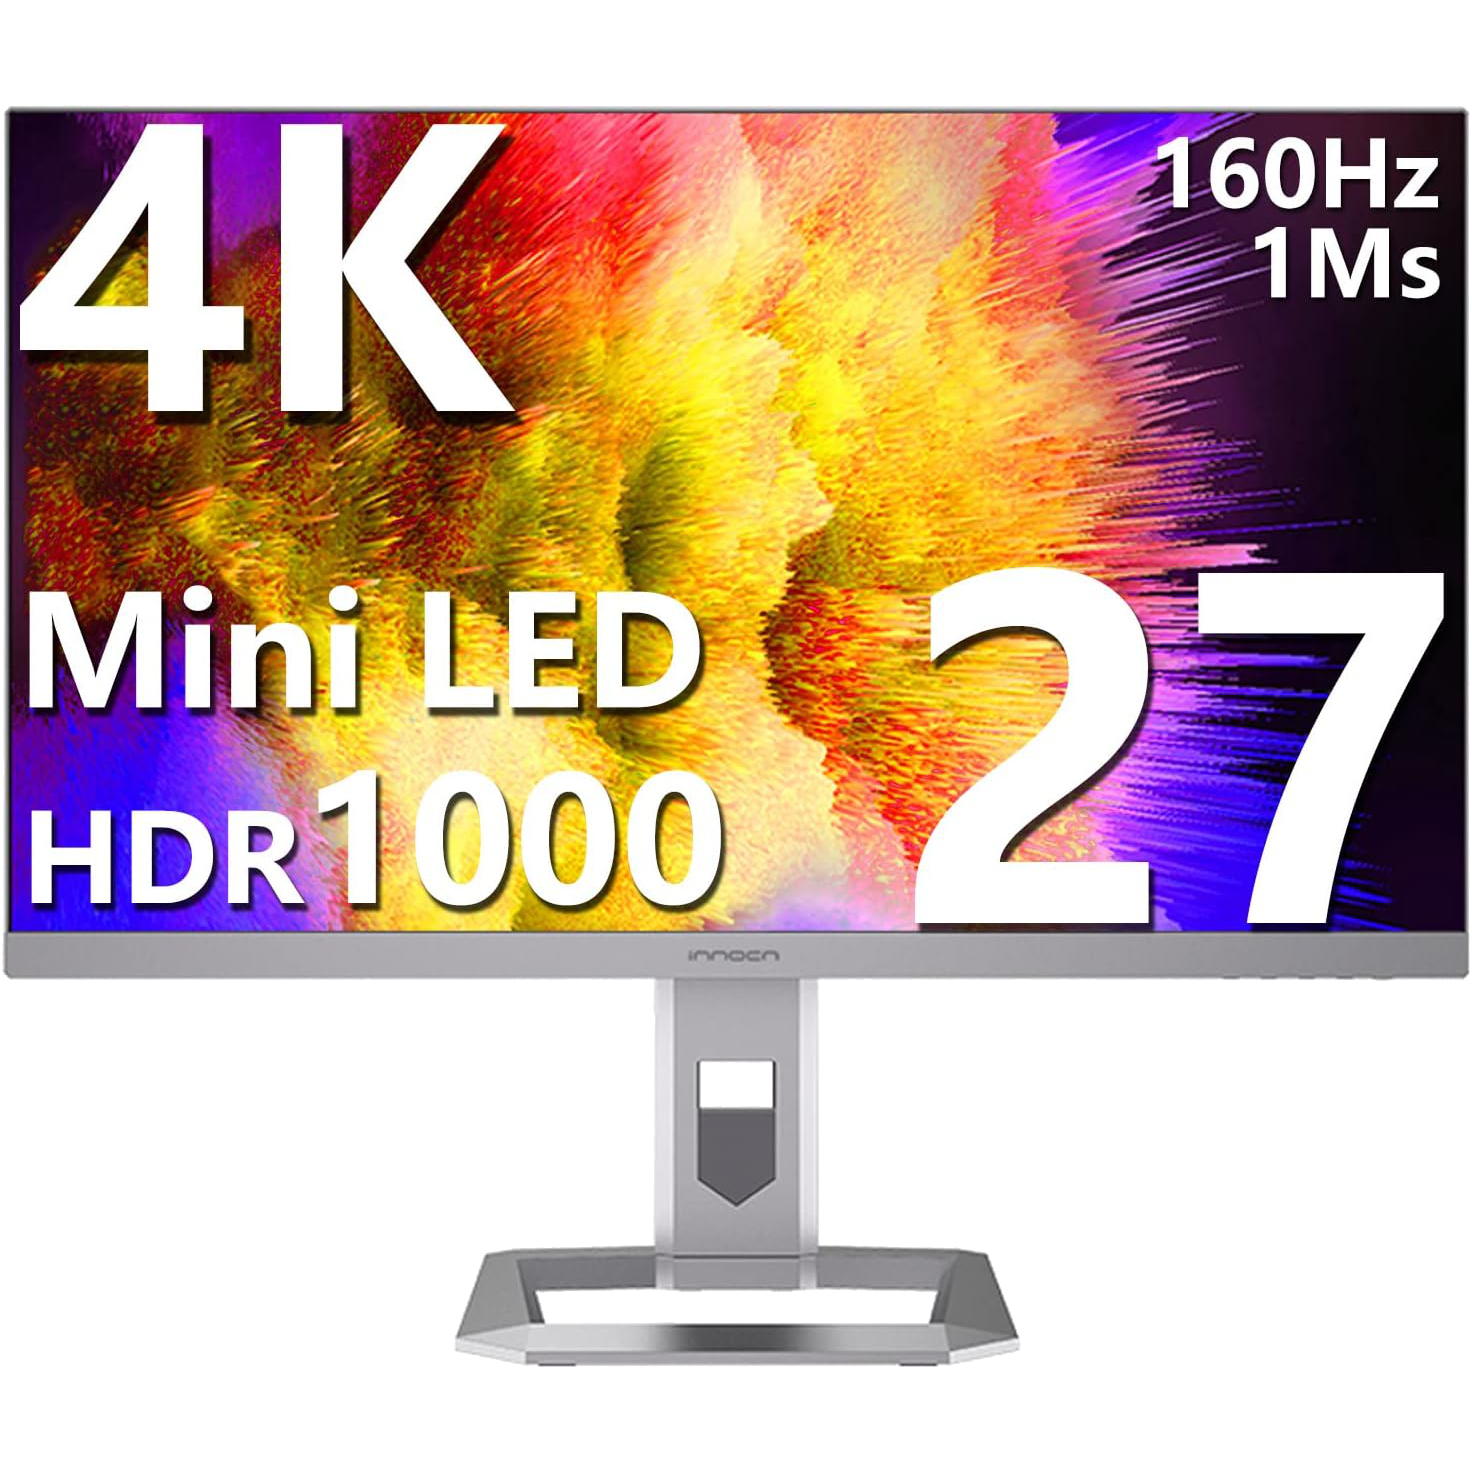 Hdmi 2.1 gaming monitor • Compare & see prices now »